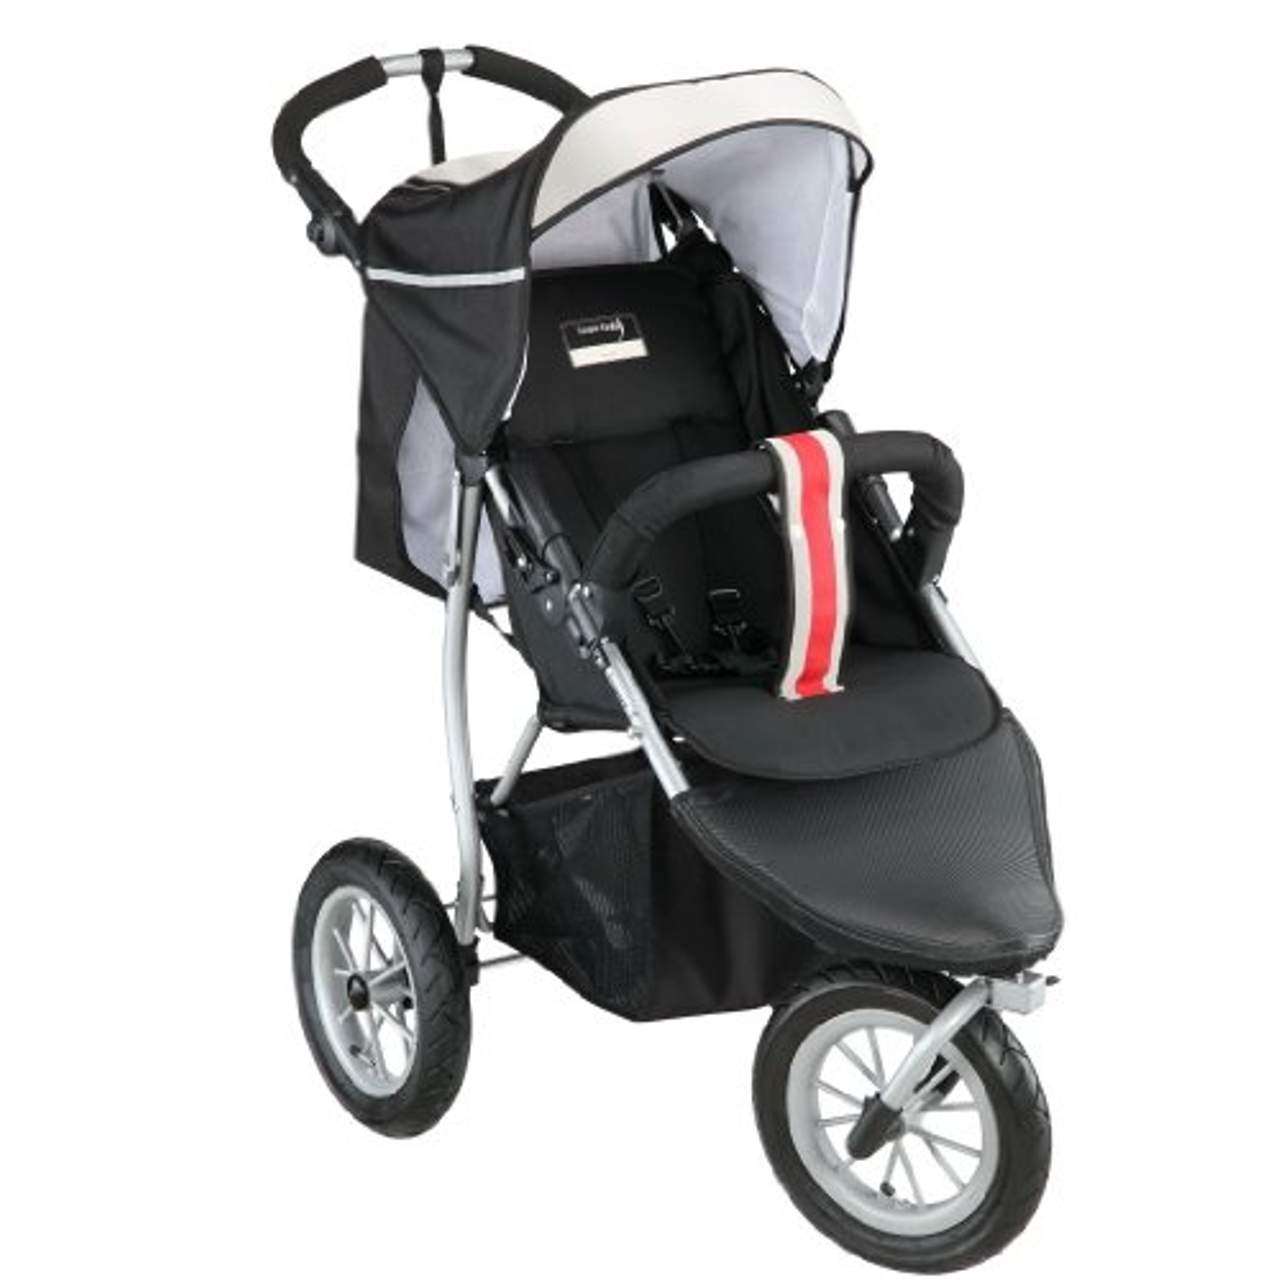 knorr-baby 883888 Joggy S sport-style